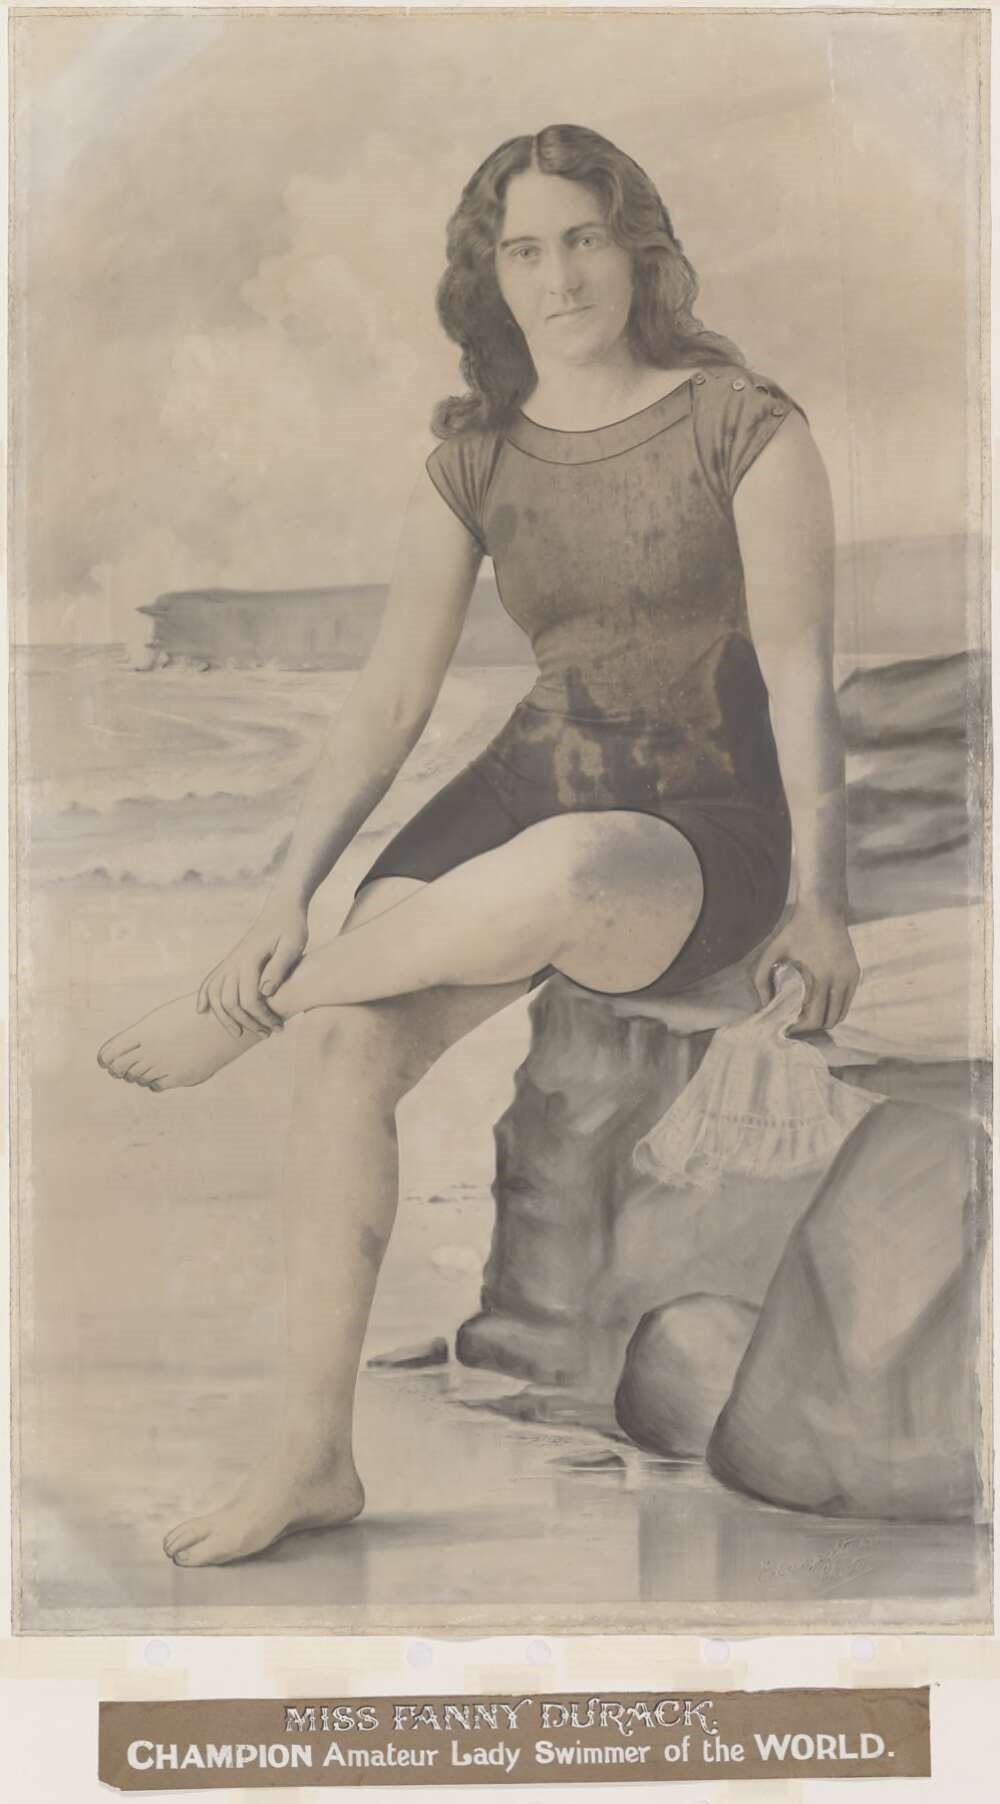 Female swimmer posing for a photograph